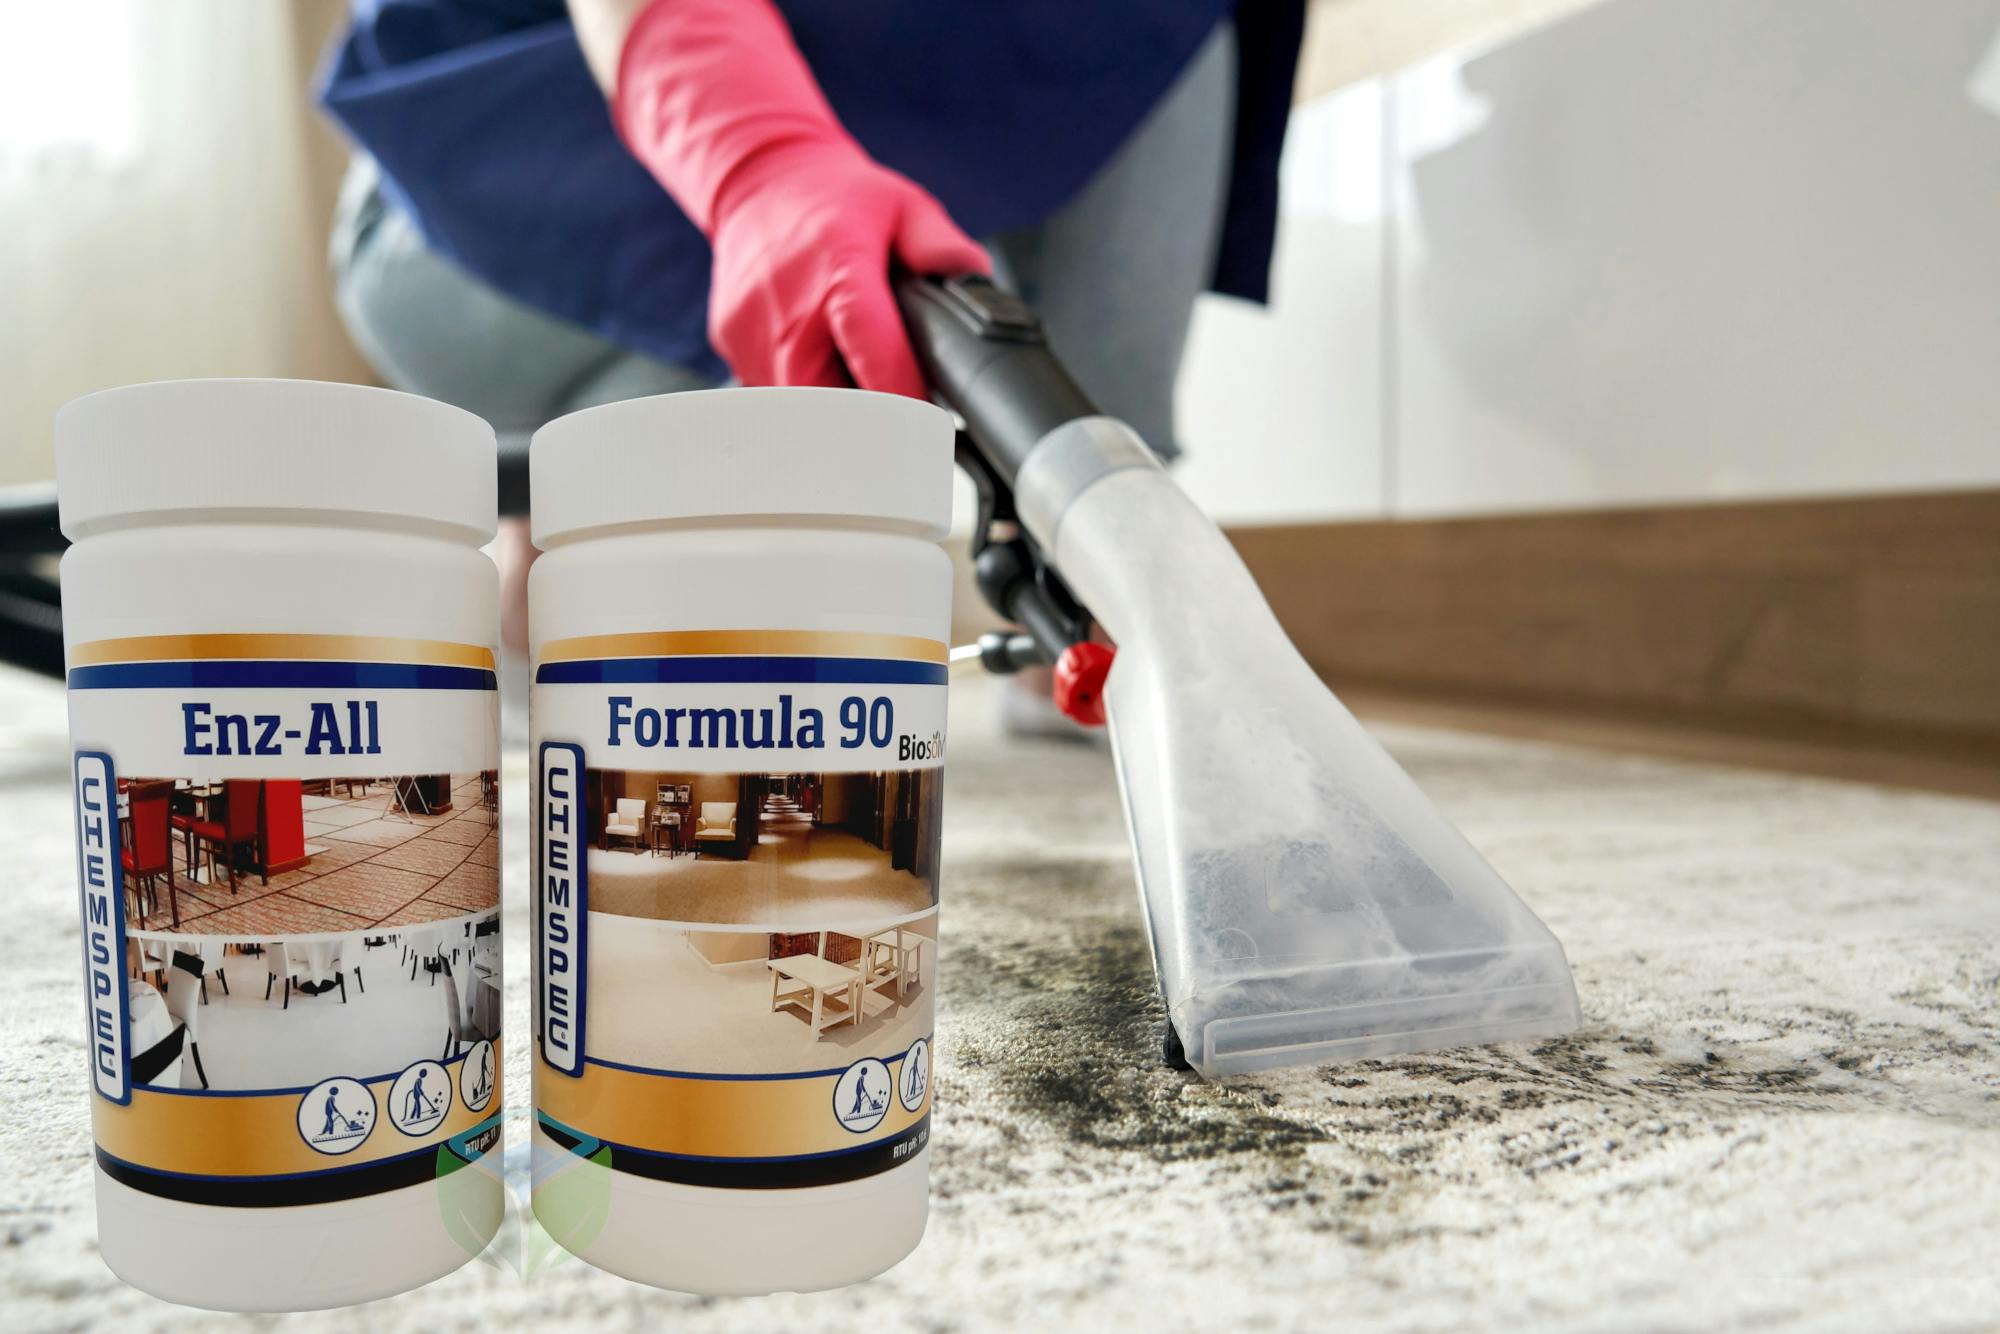 Only specialized chemicals for cleaning carpets, sofas, and carpets.